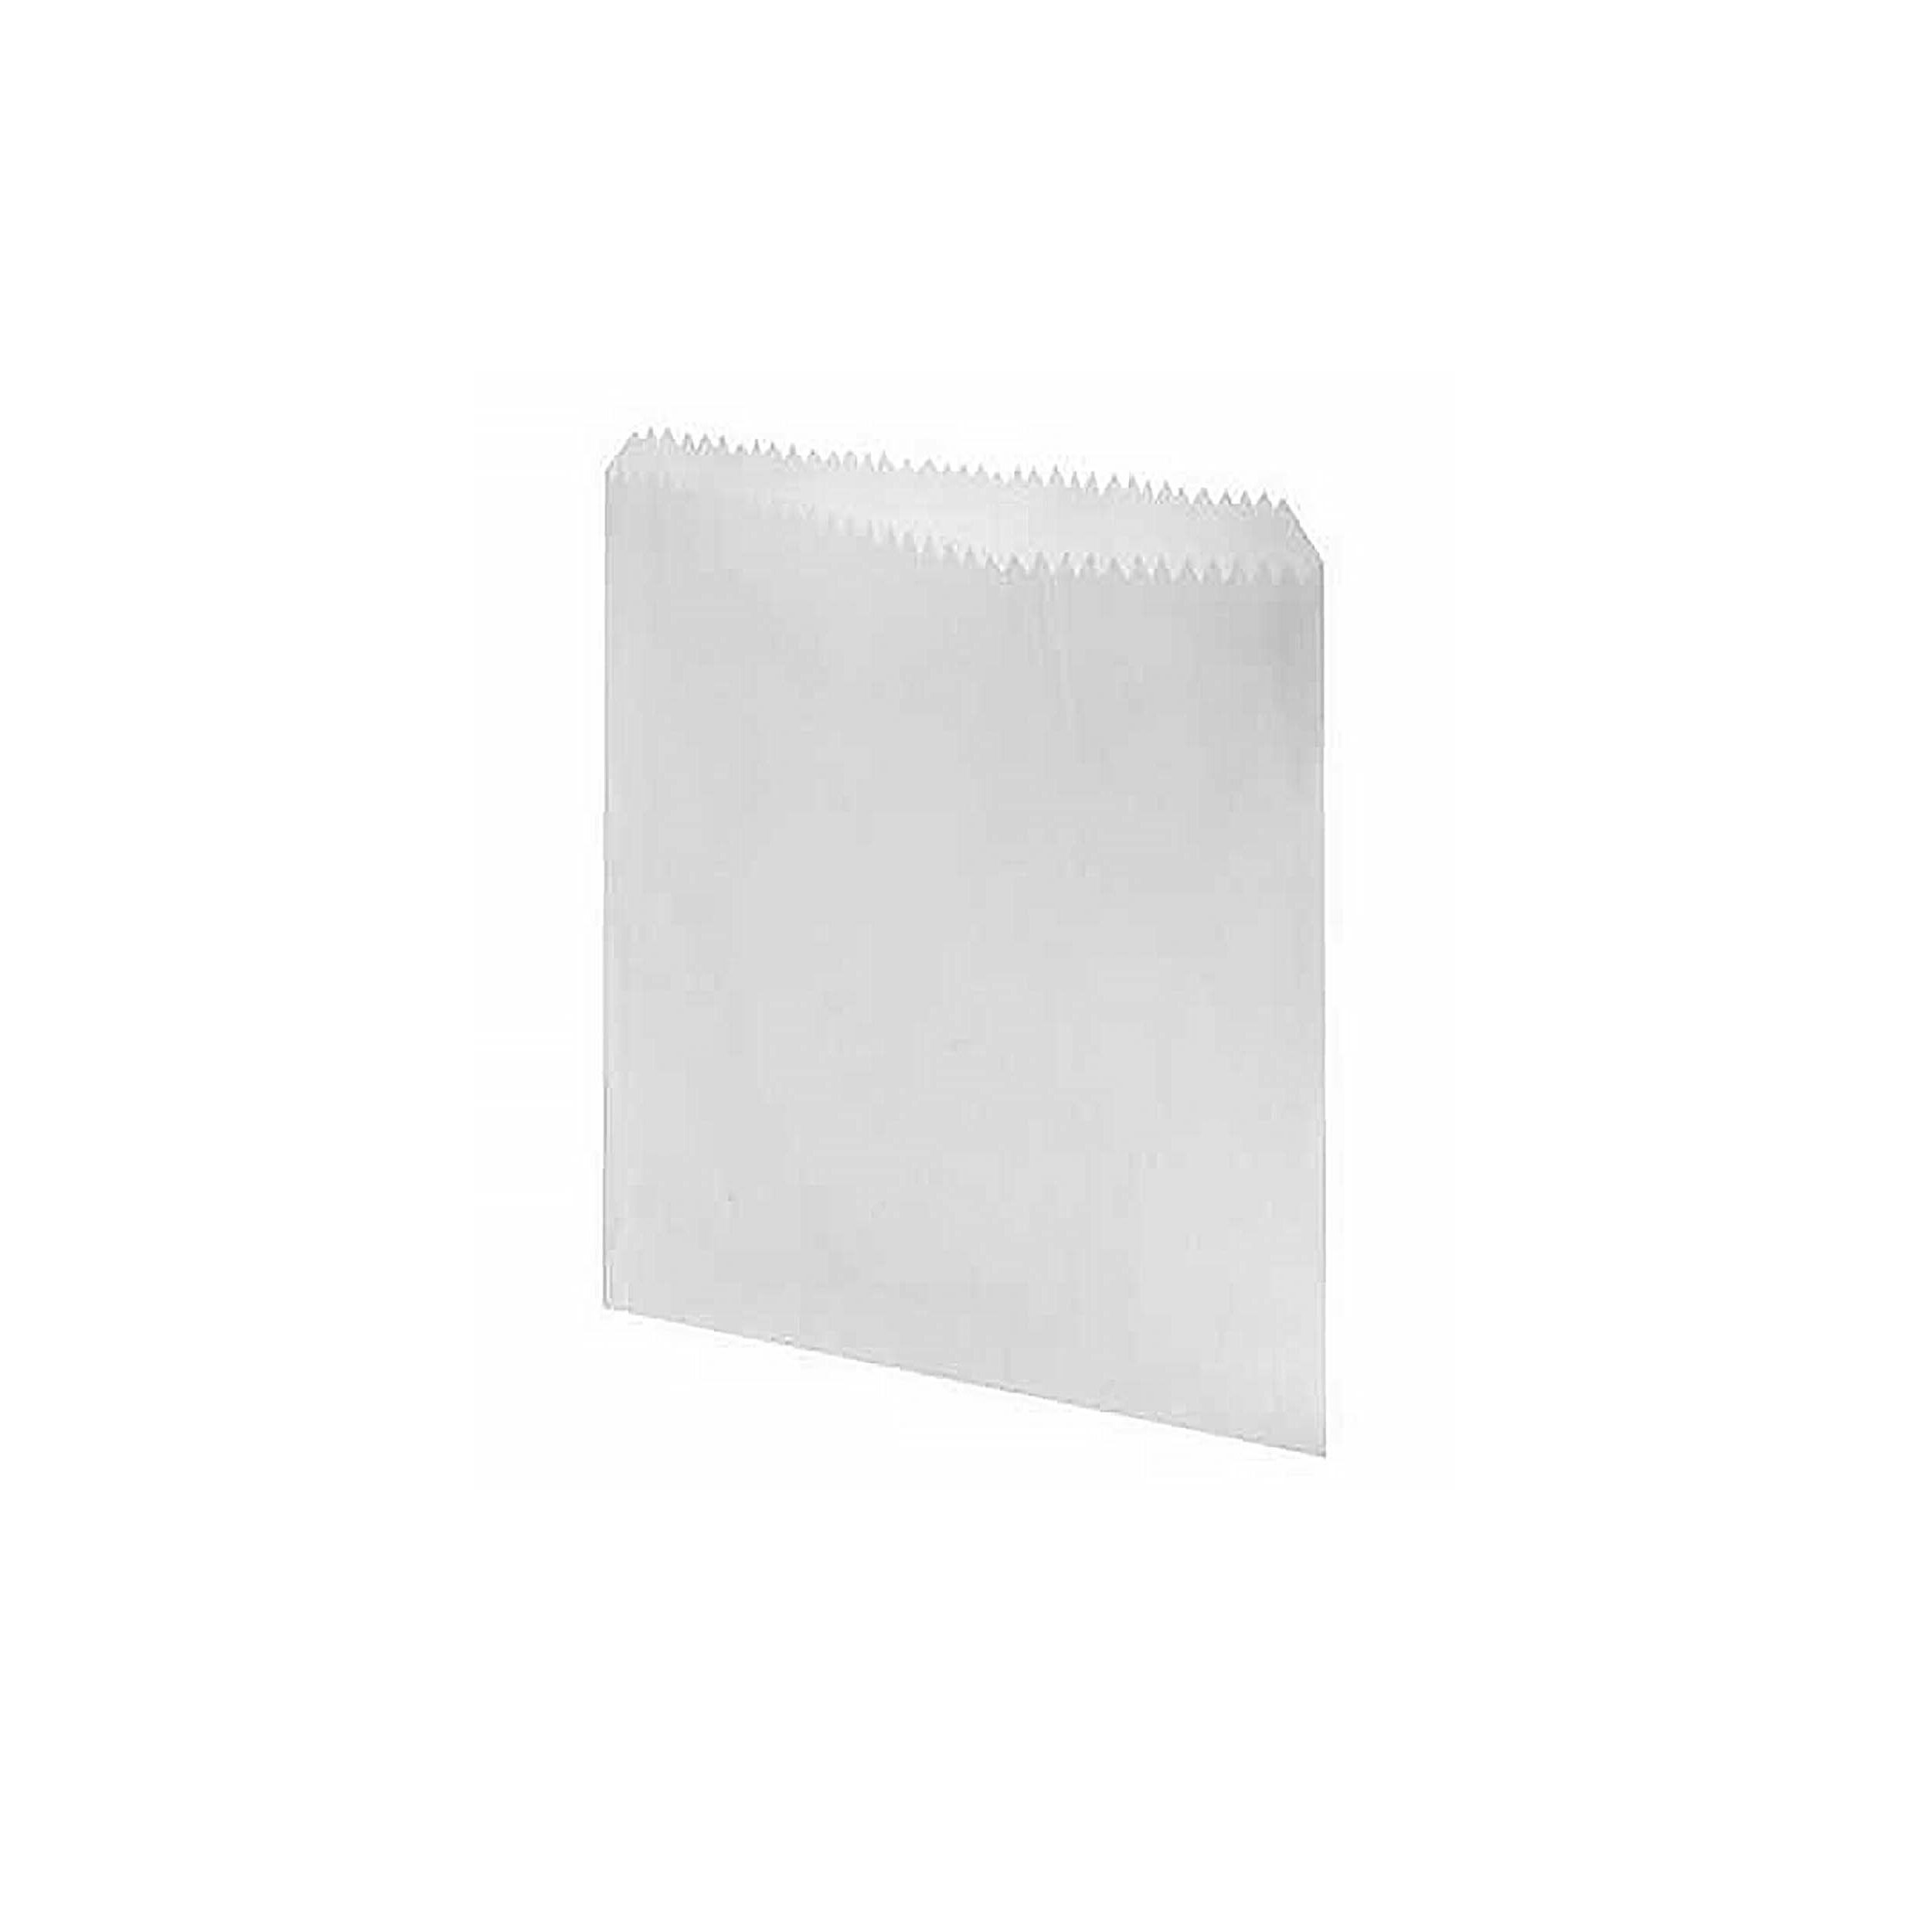 GREASE PROOF BAG SIZE 1/2 115x135 - 1 x 1000